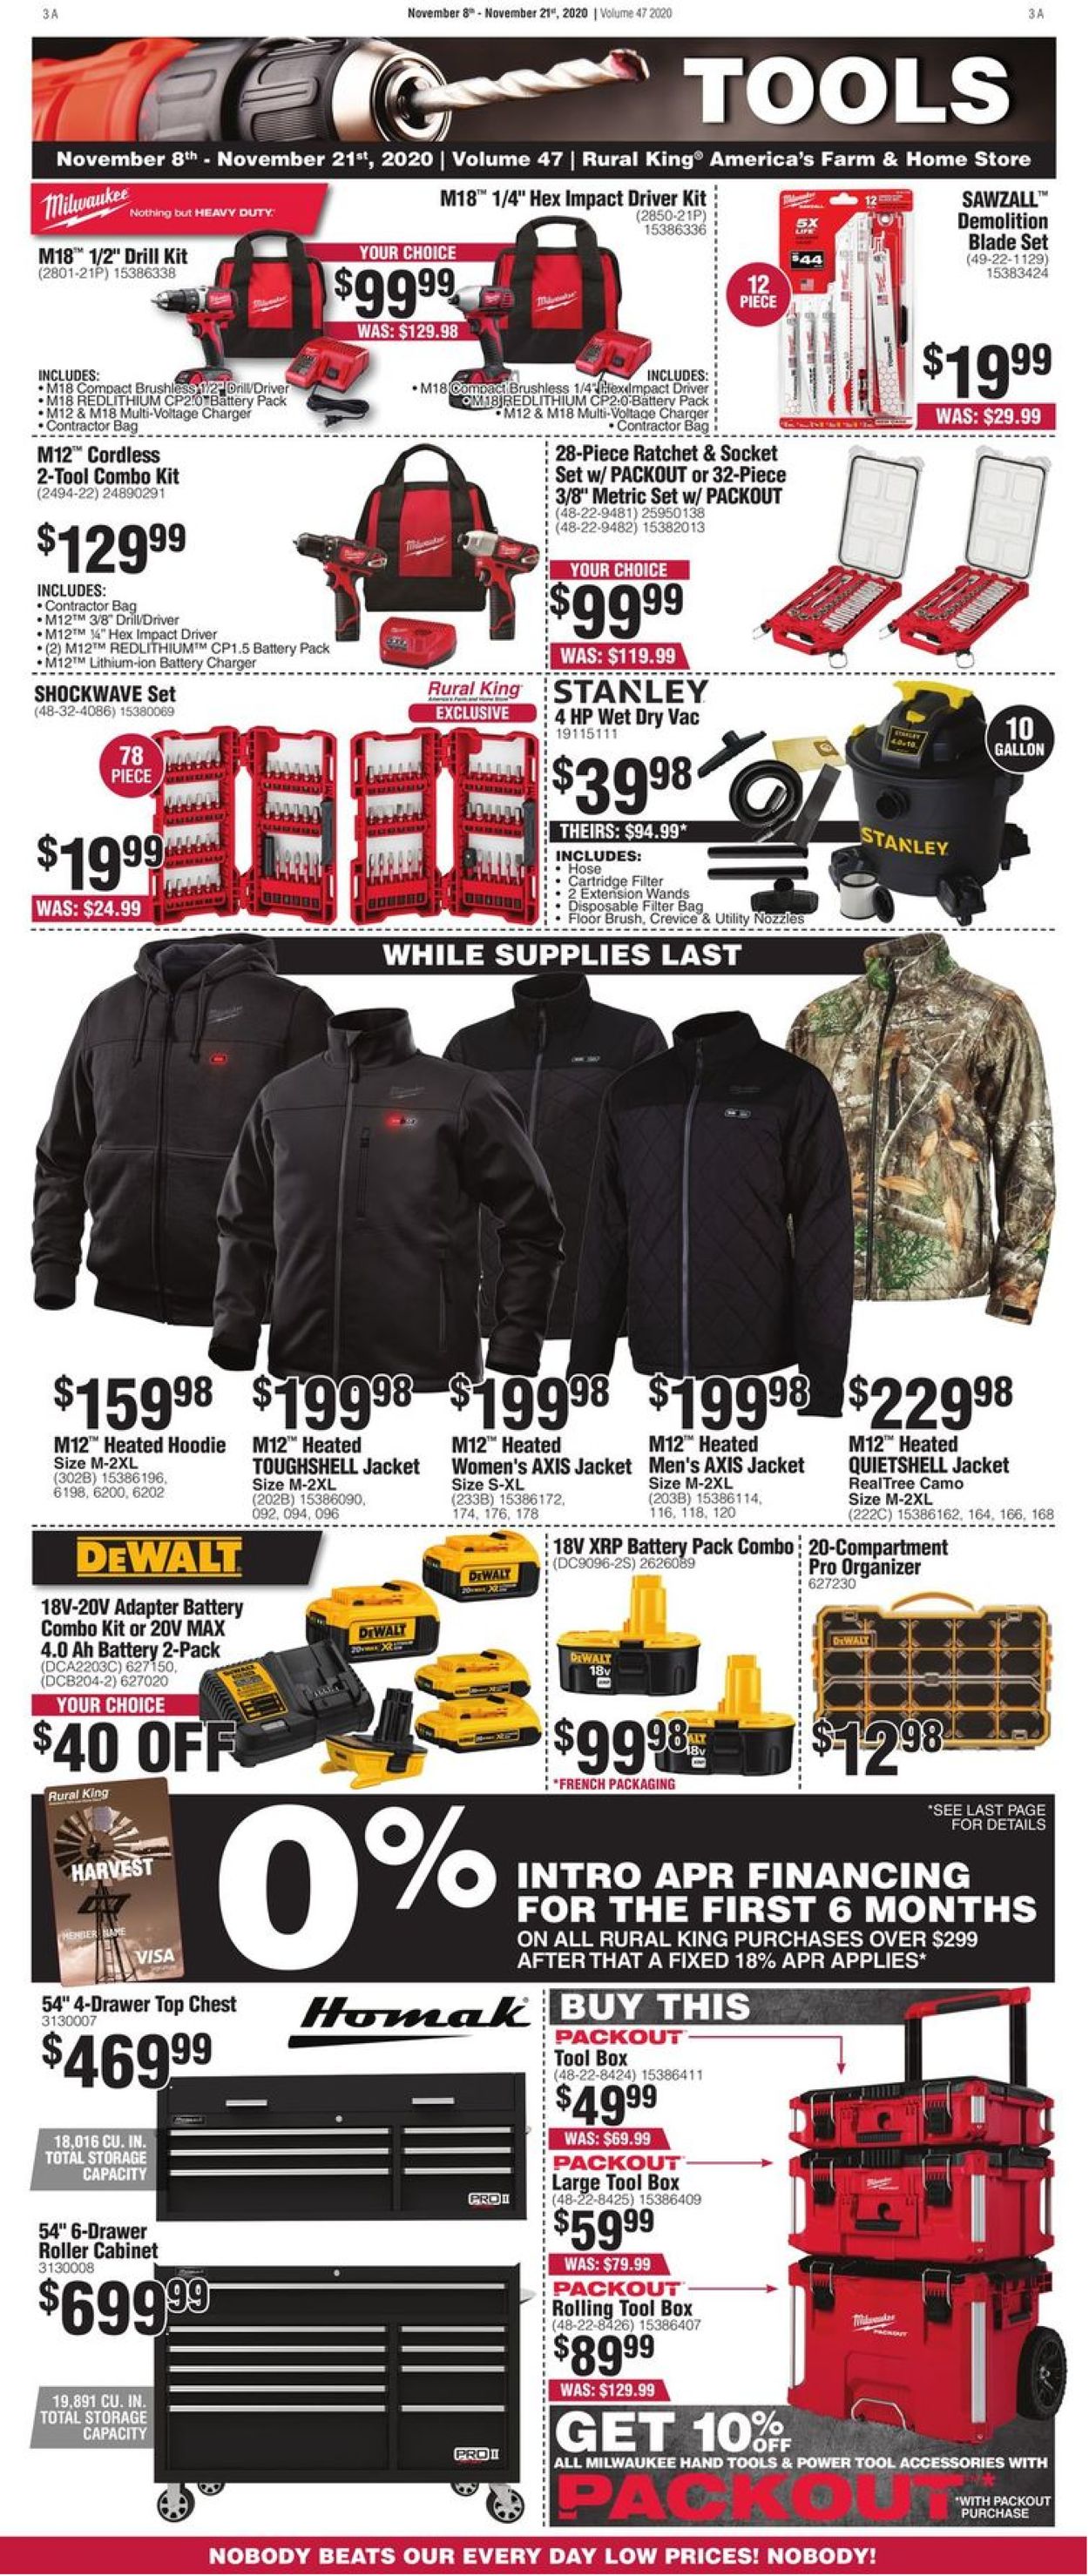 Rural King Black Friday 2020 Current weekly ad 11/08 11/21/2020 [4